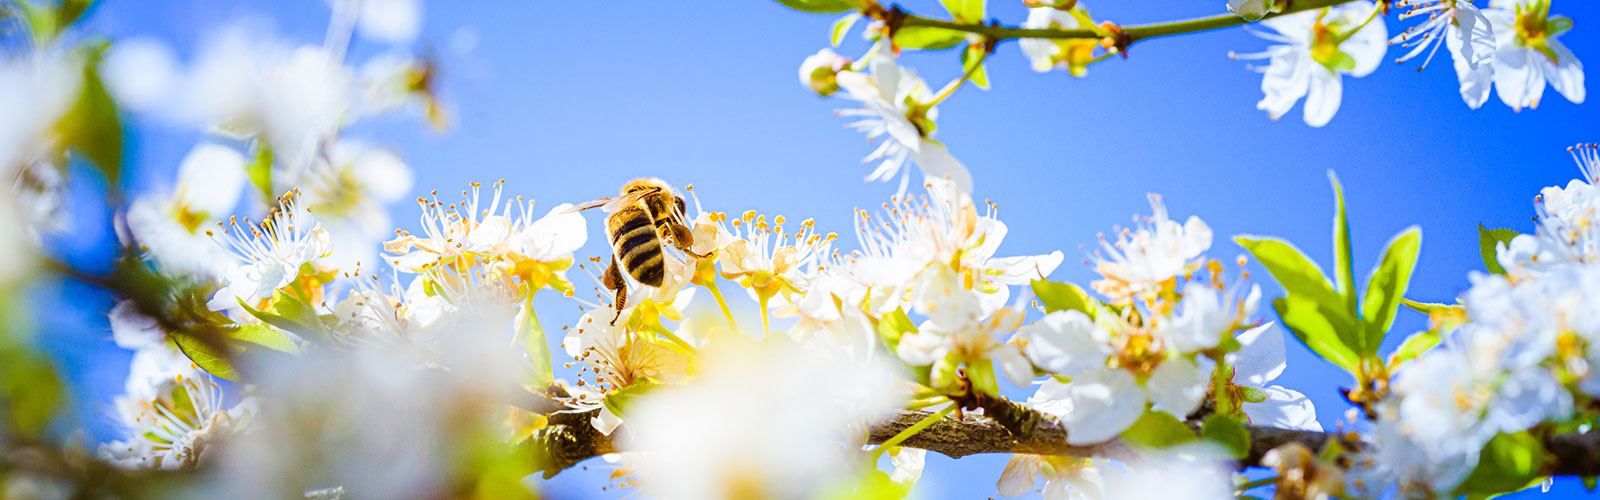 A bee landing on white blossoms with a bright blue sky